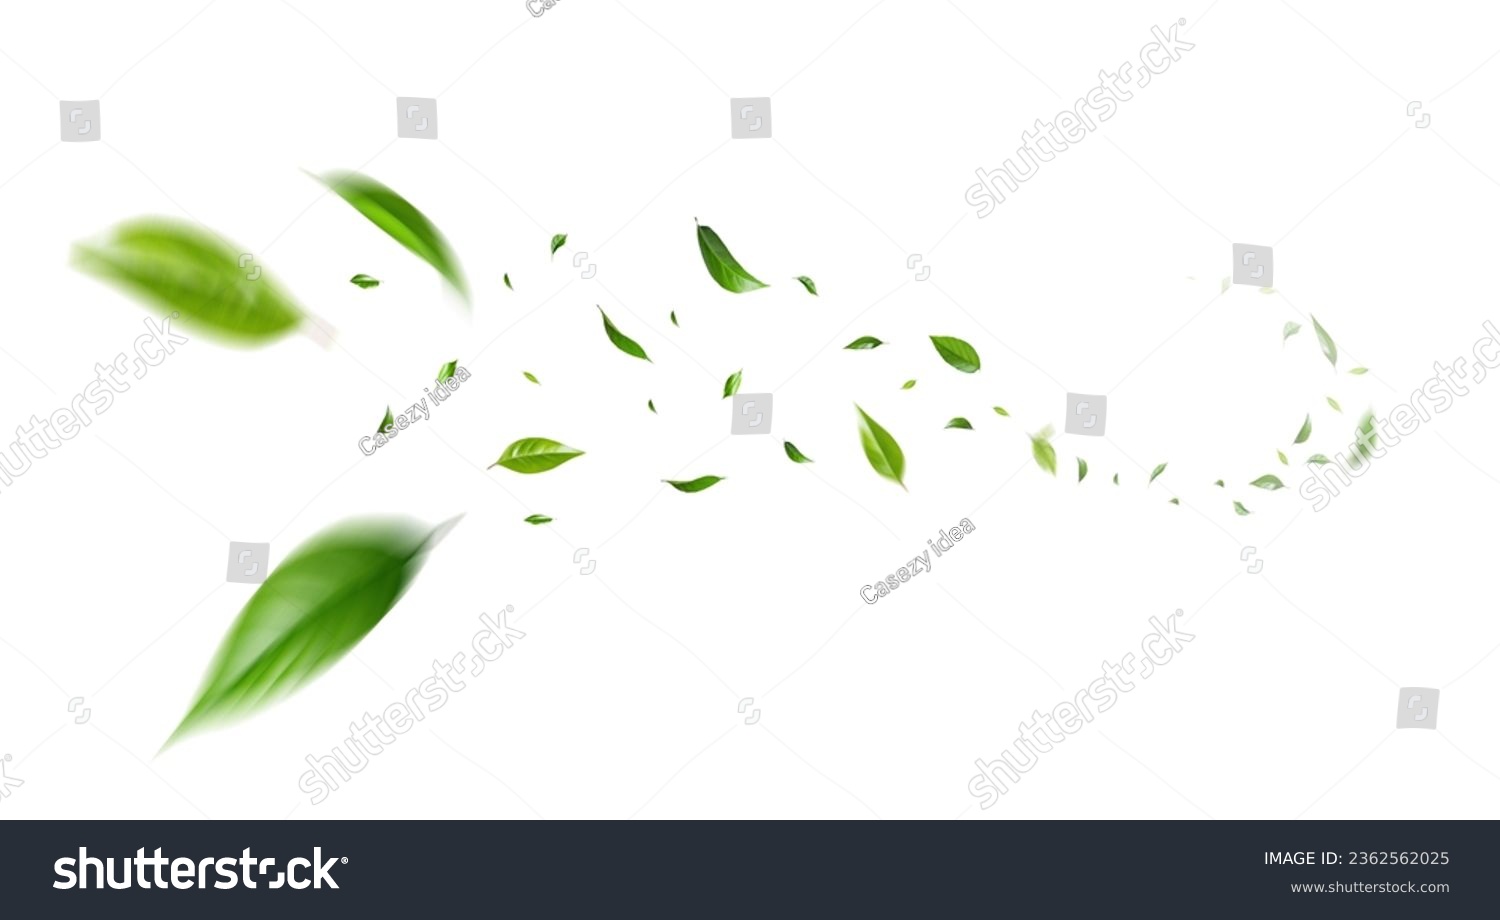 Flying green leaves on white background. Fresh spring foliage. Environment and ecology backdrop #2362562025